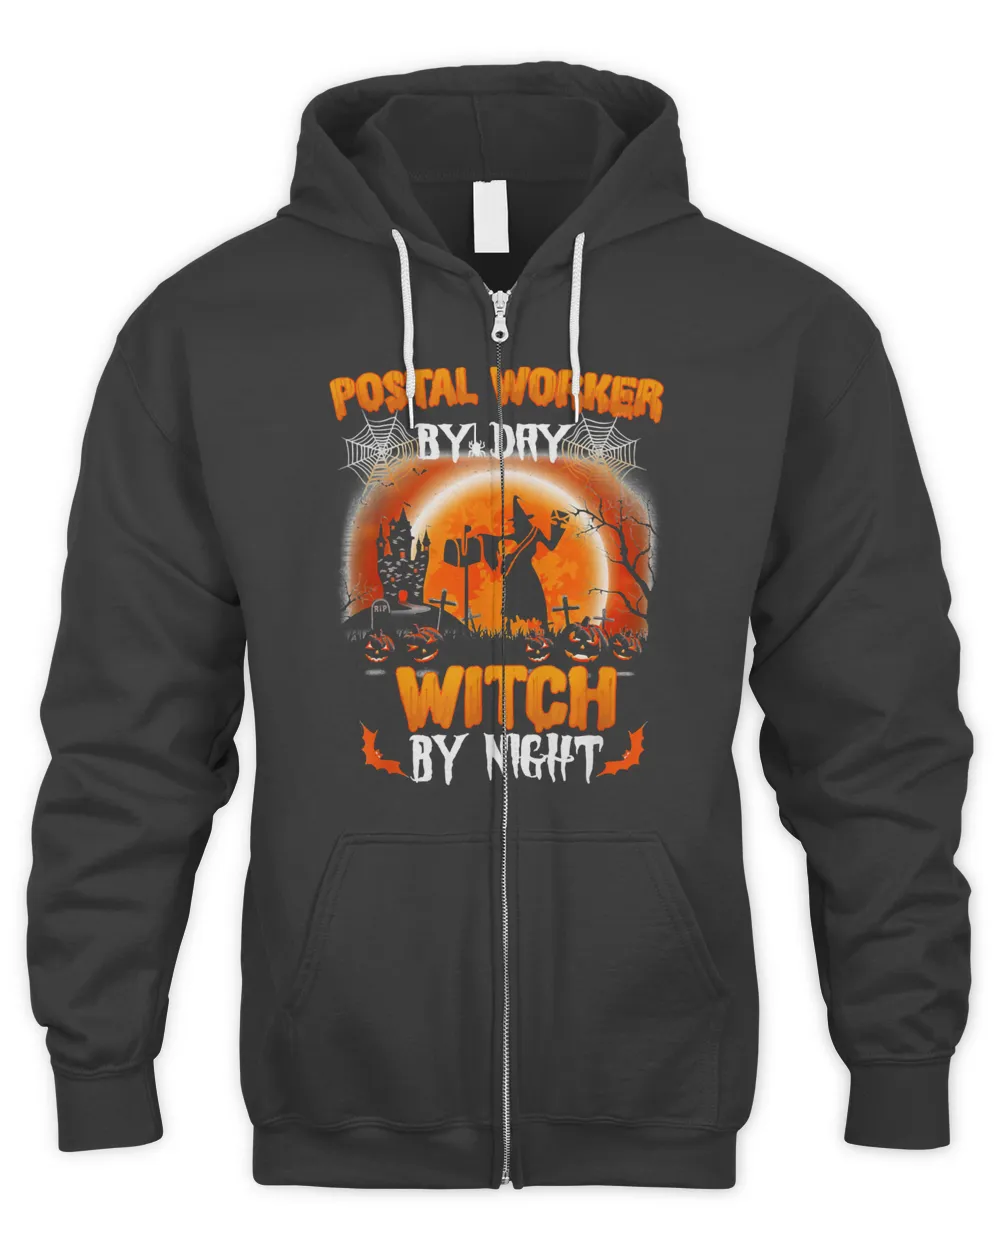 Halloween Postal Worker By Day Witch By Night Funny Halloween Day 296 Pumpkin